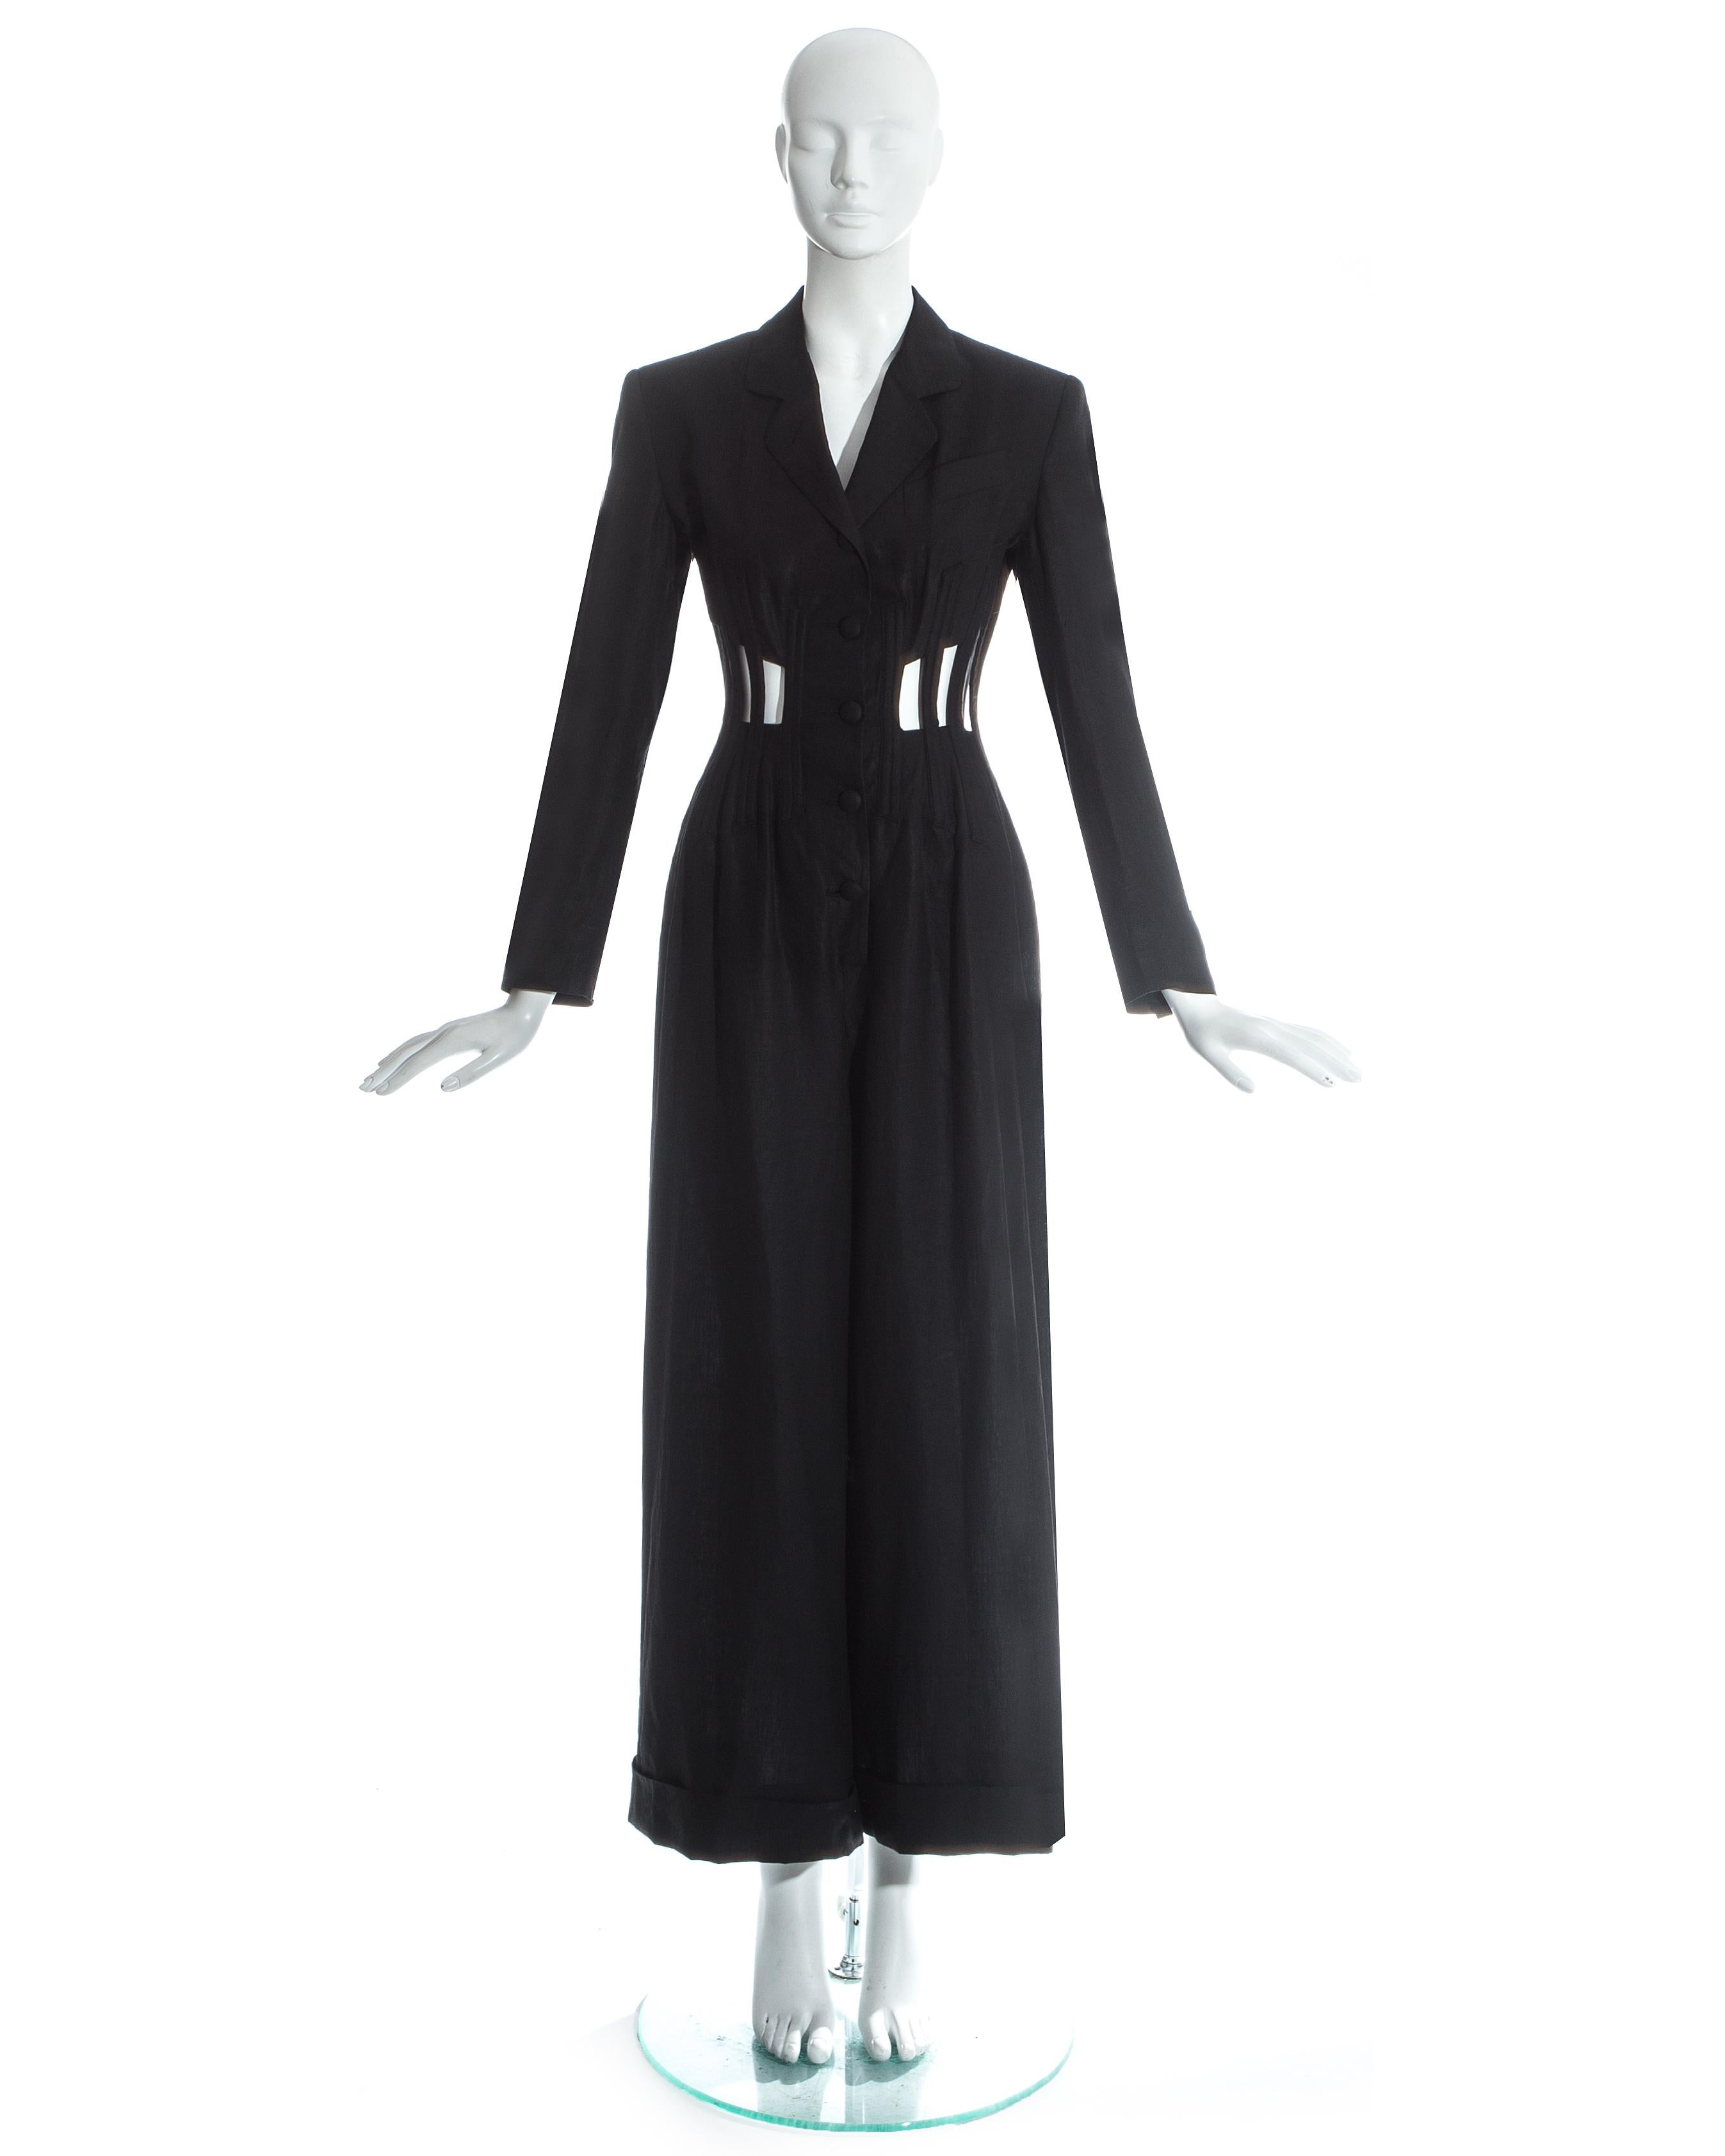 Jean Paul Gaultier; Black linen tuxedo jumpsuit. Caged corset around waist with openings revealing the skin and lace up fastening at the back. Wide leg pants with turn ups, structured blazer with internal padding, and fabric button fastenings at the